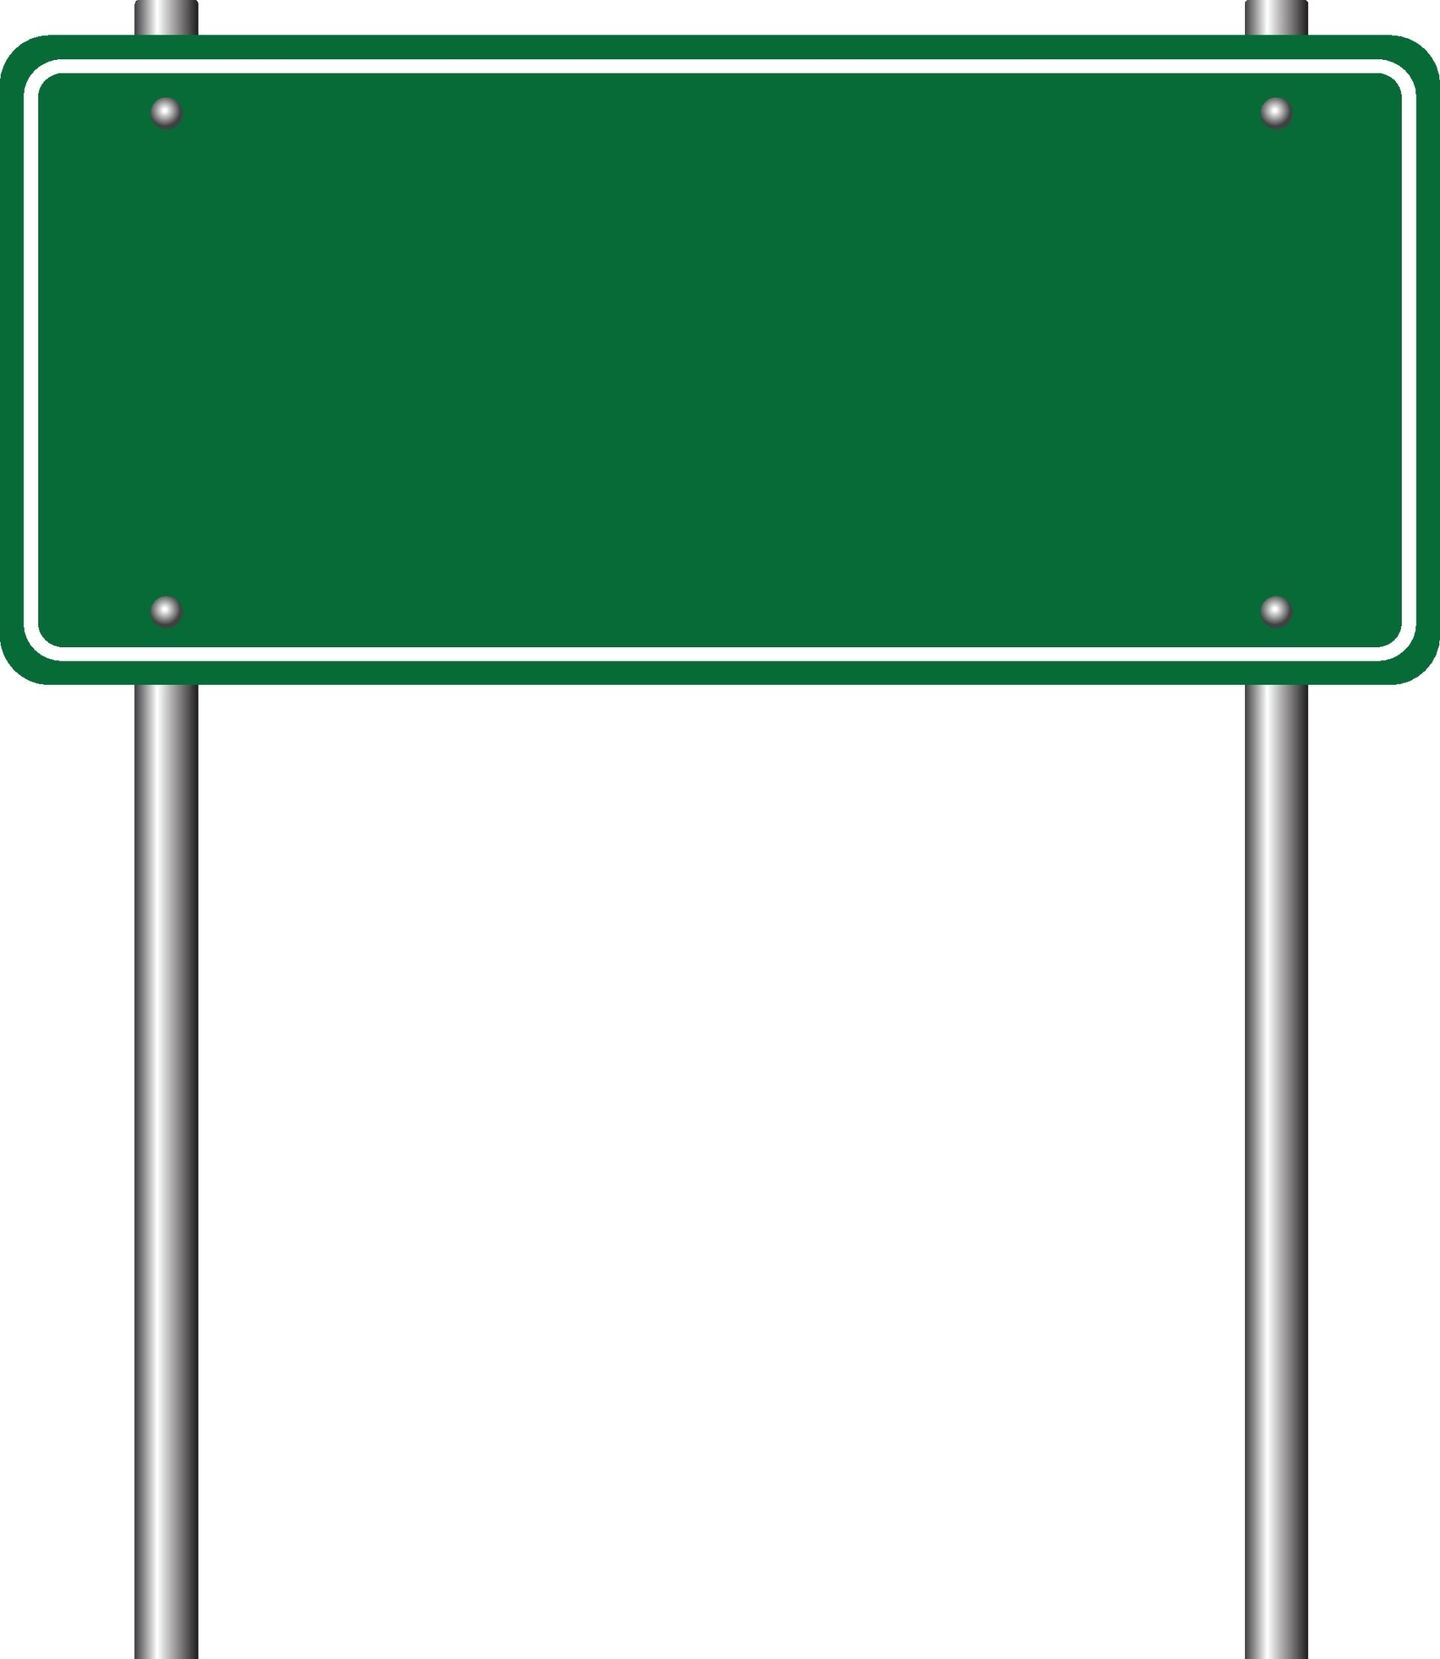 image of guide signs road signs